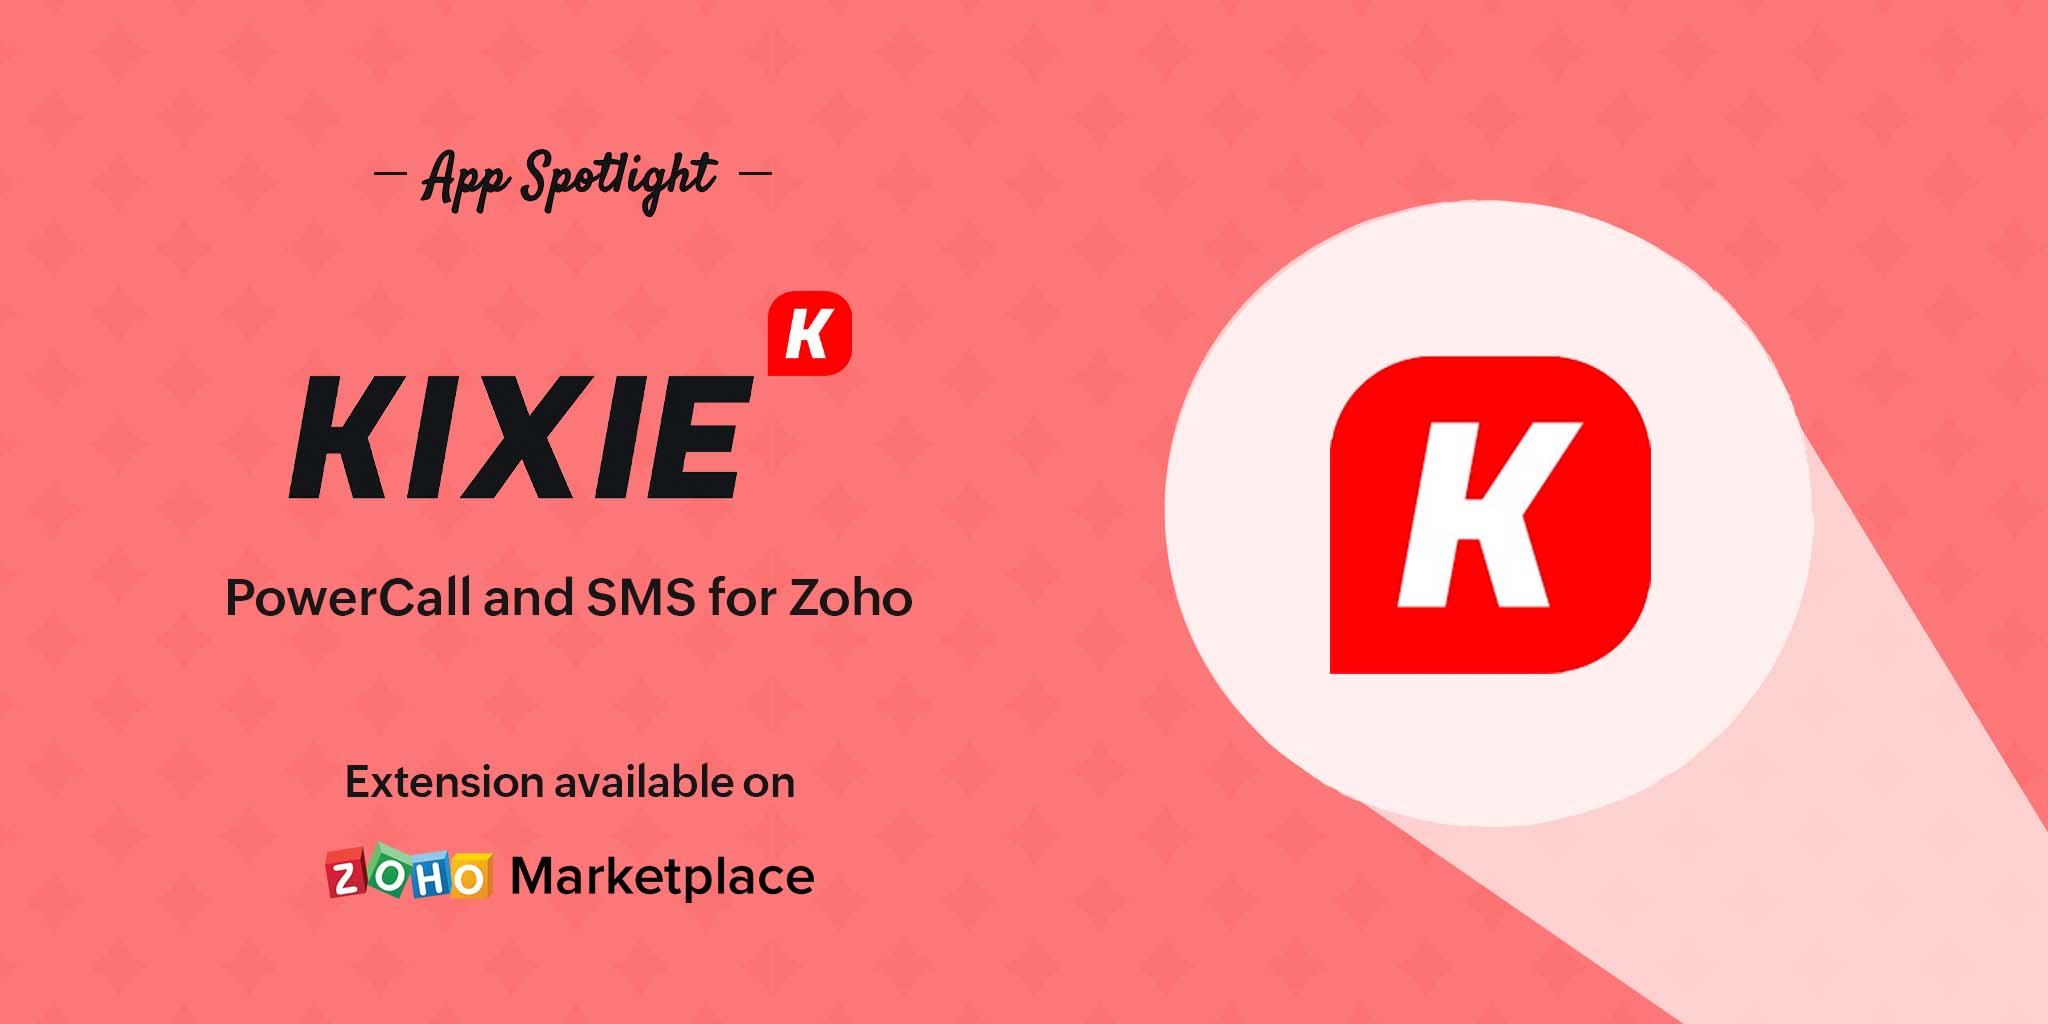 App Spotlight: PowerCall and SMS for Zoho